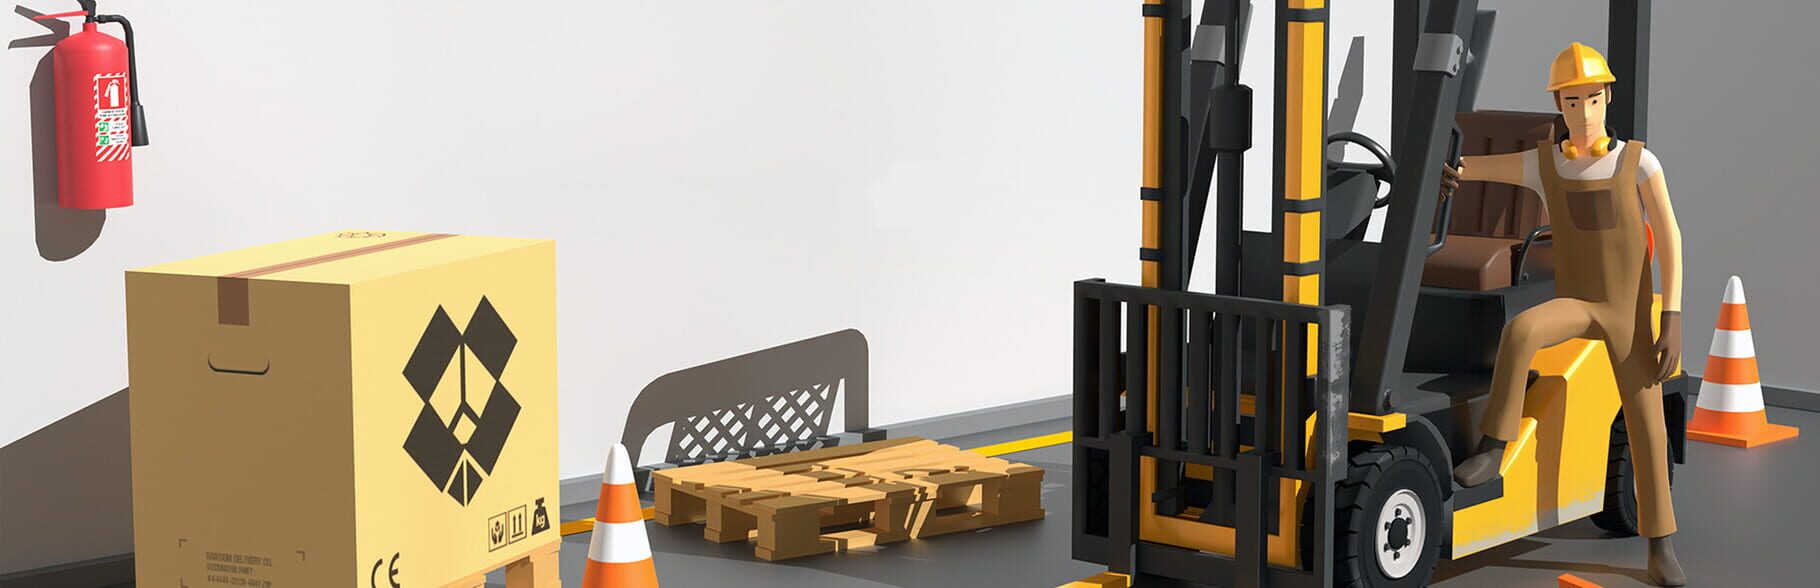 Forklift Extreme: Deluxe Edition artwork